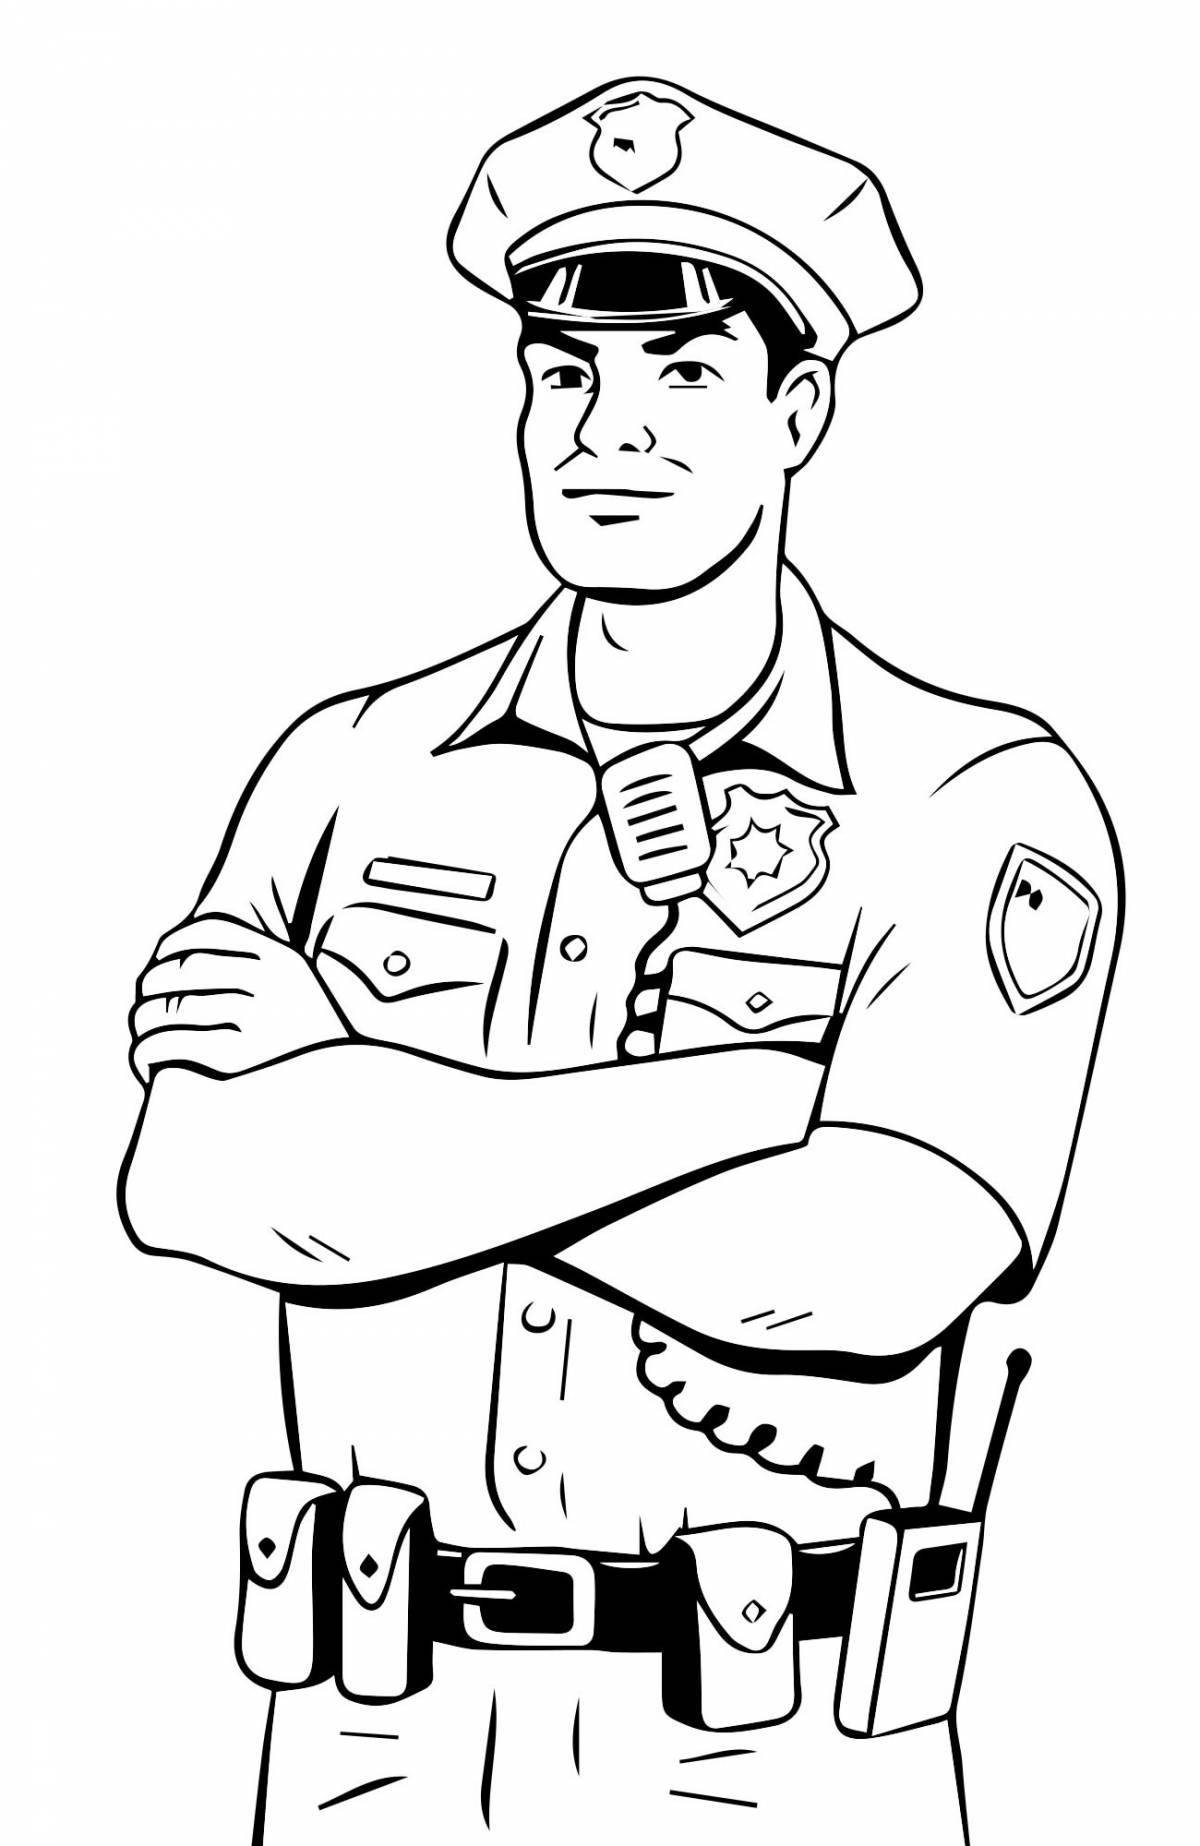 Coloring page attractive traffic police